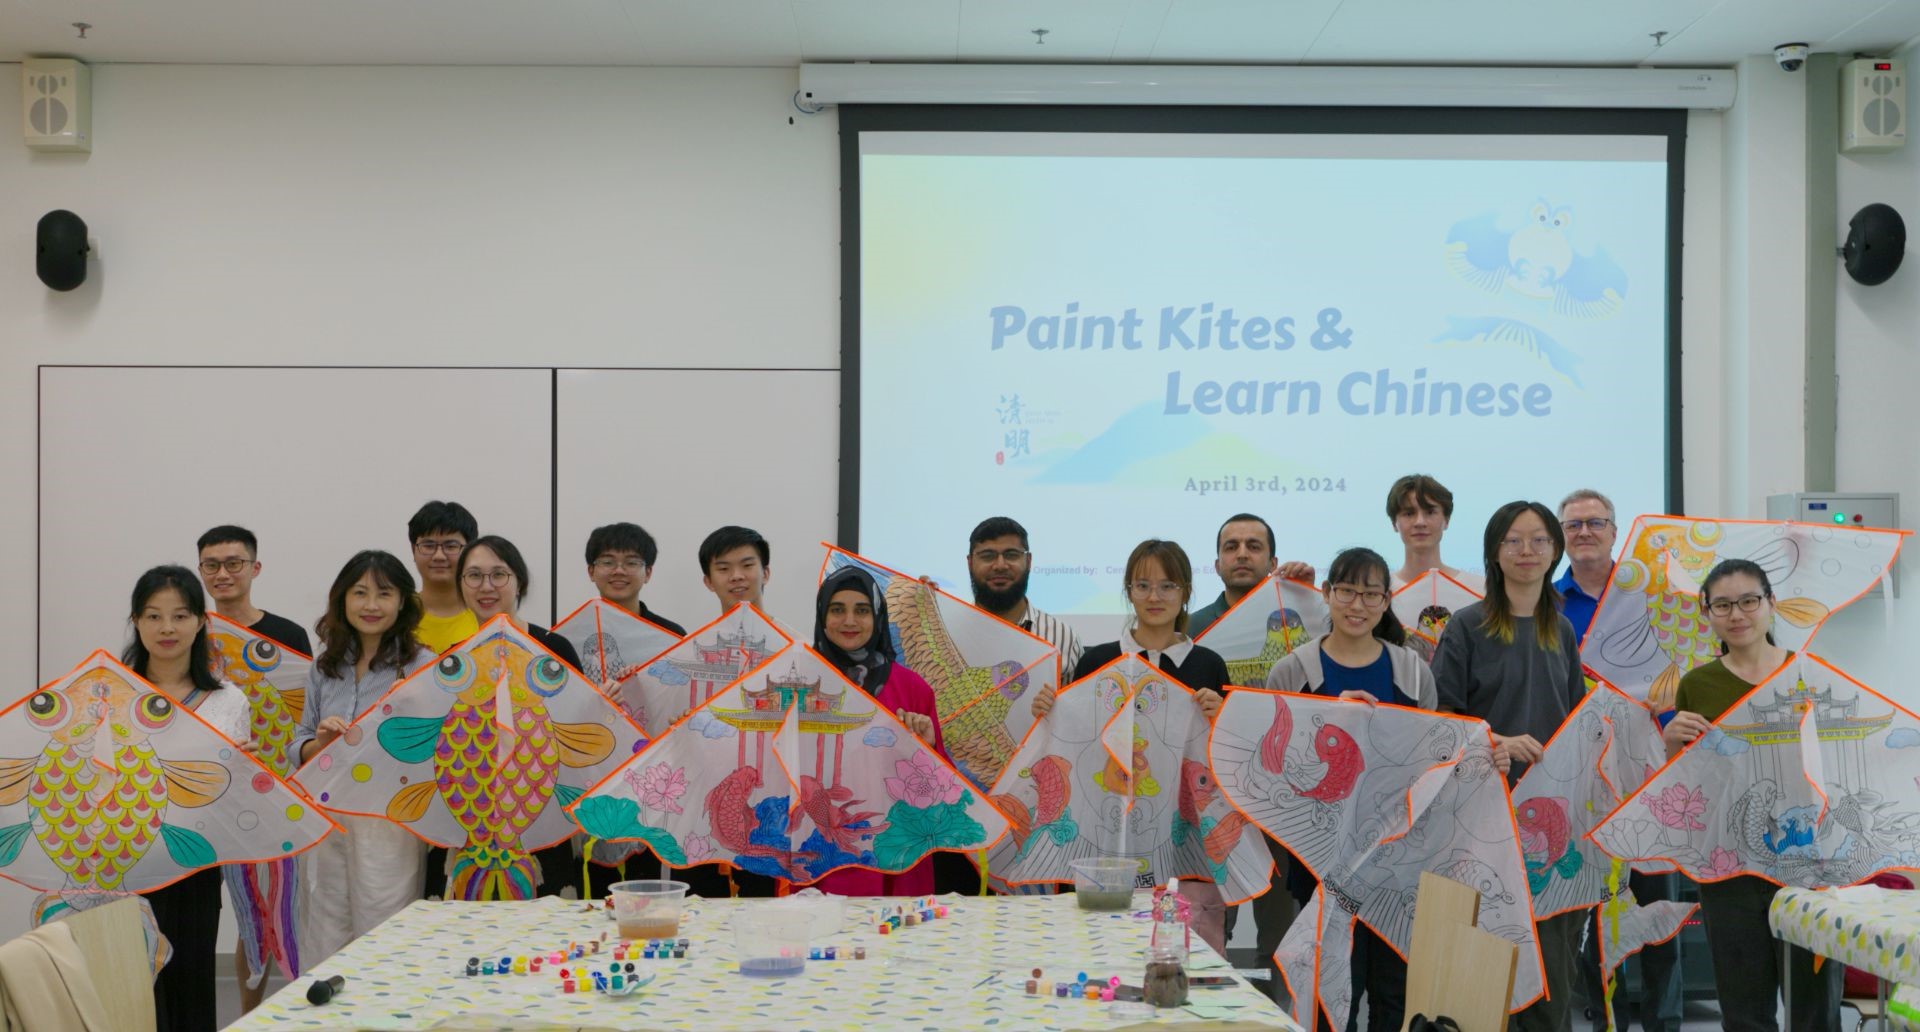 Exploring Chinese culture and unleashing creativity: SUSTech holds “Paint Kites & Learn Chinese” event